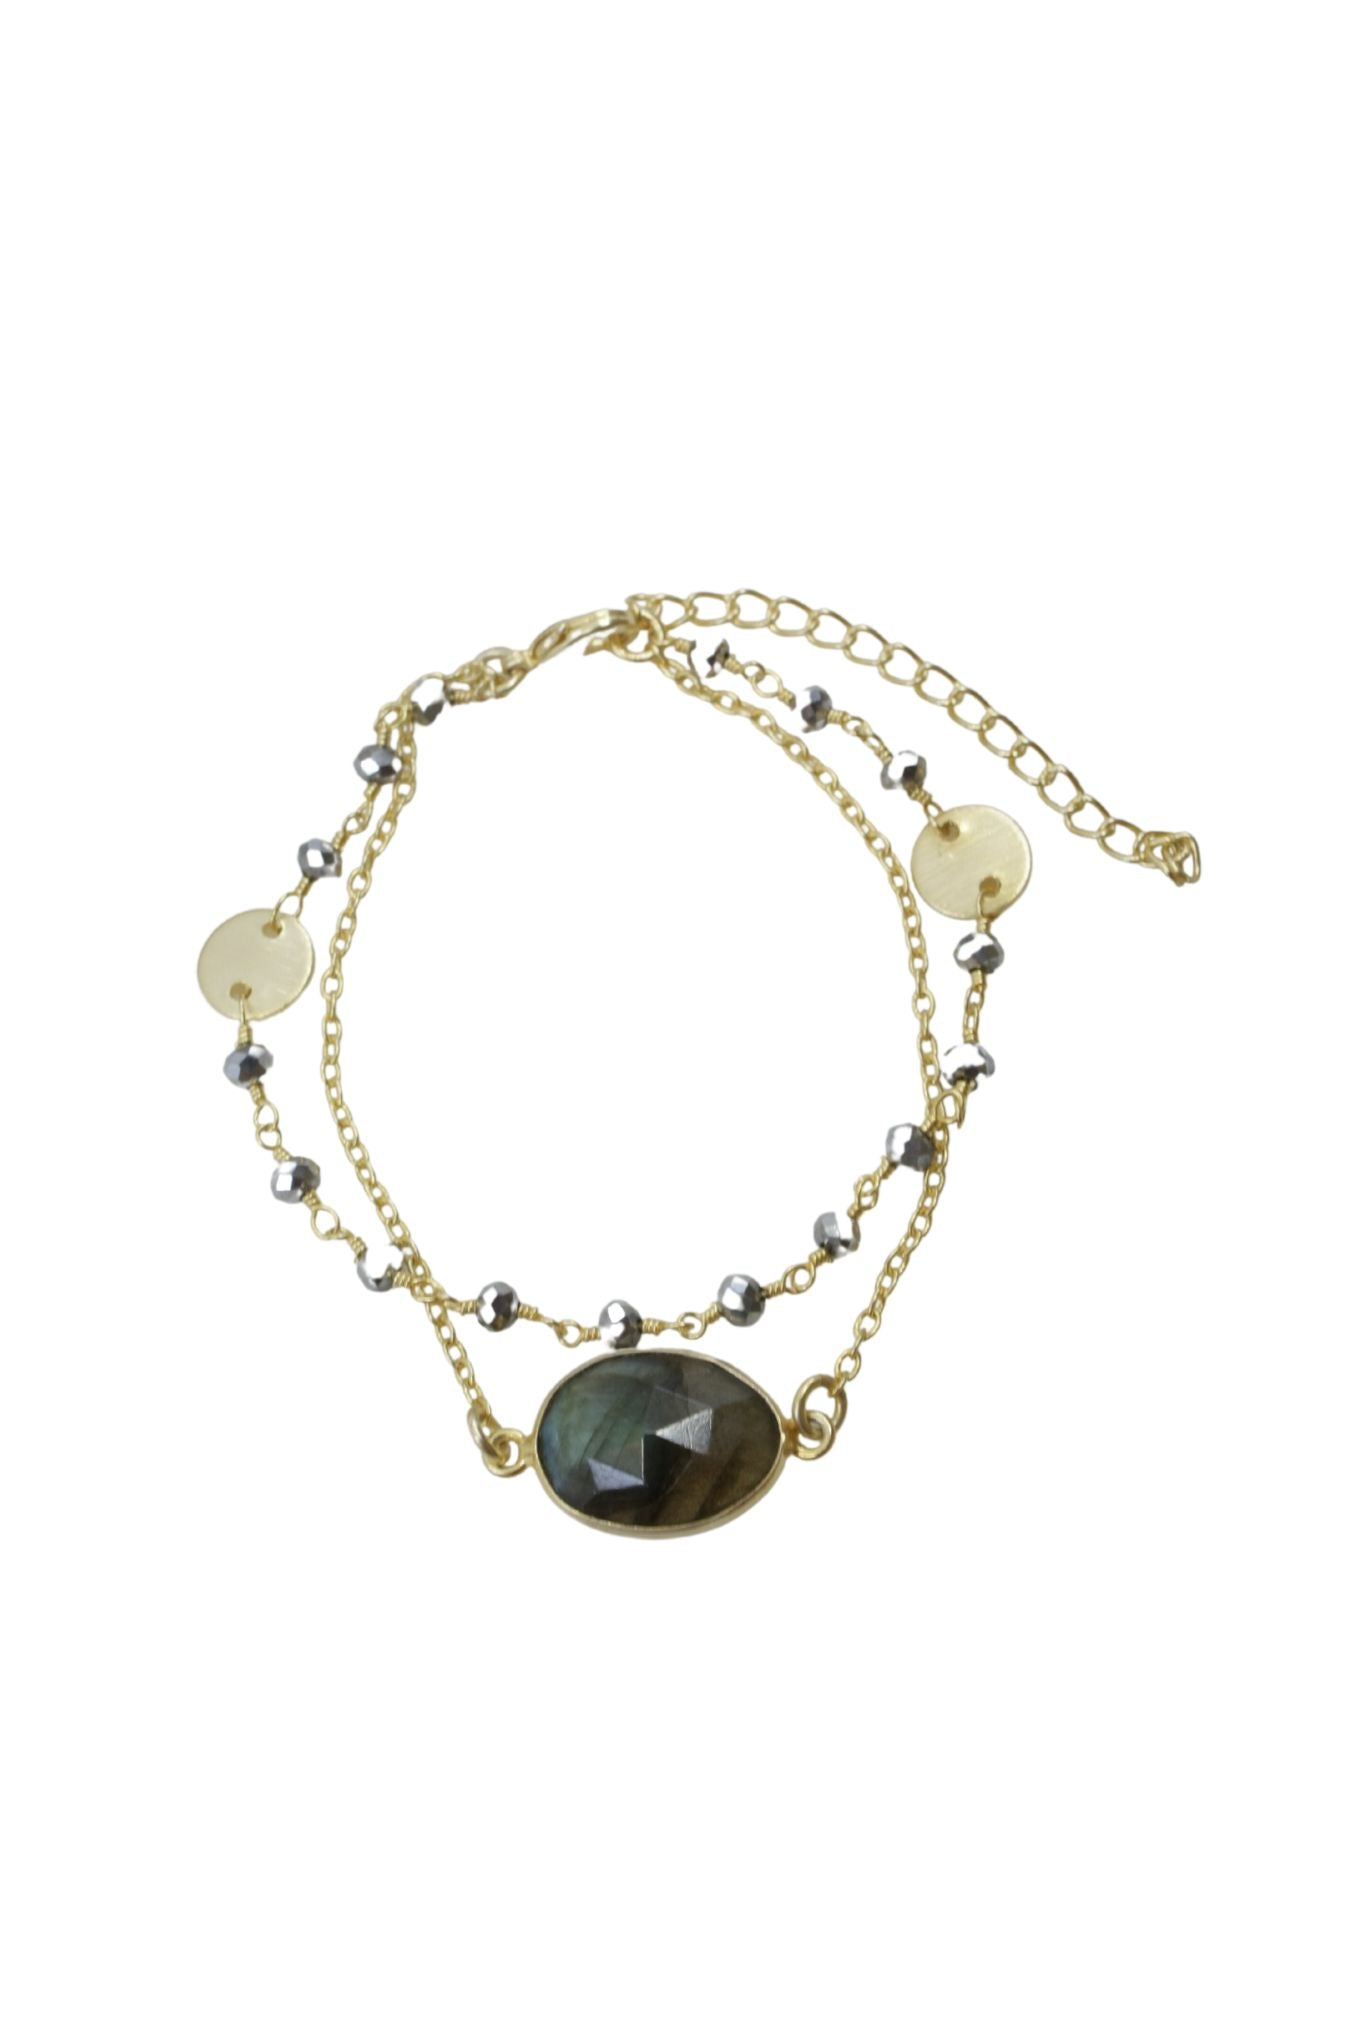 Gold and Pyrite Bracelet with Labradorite